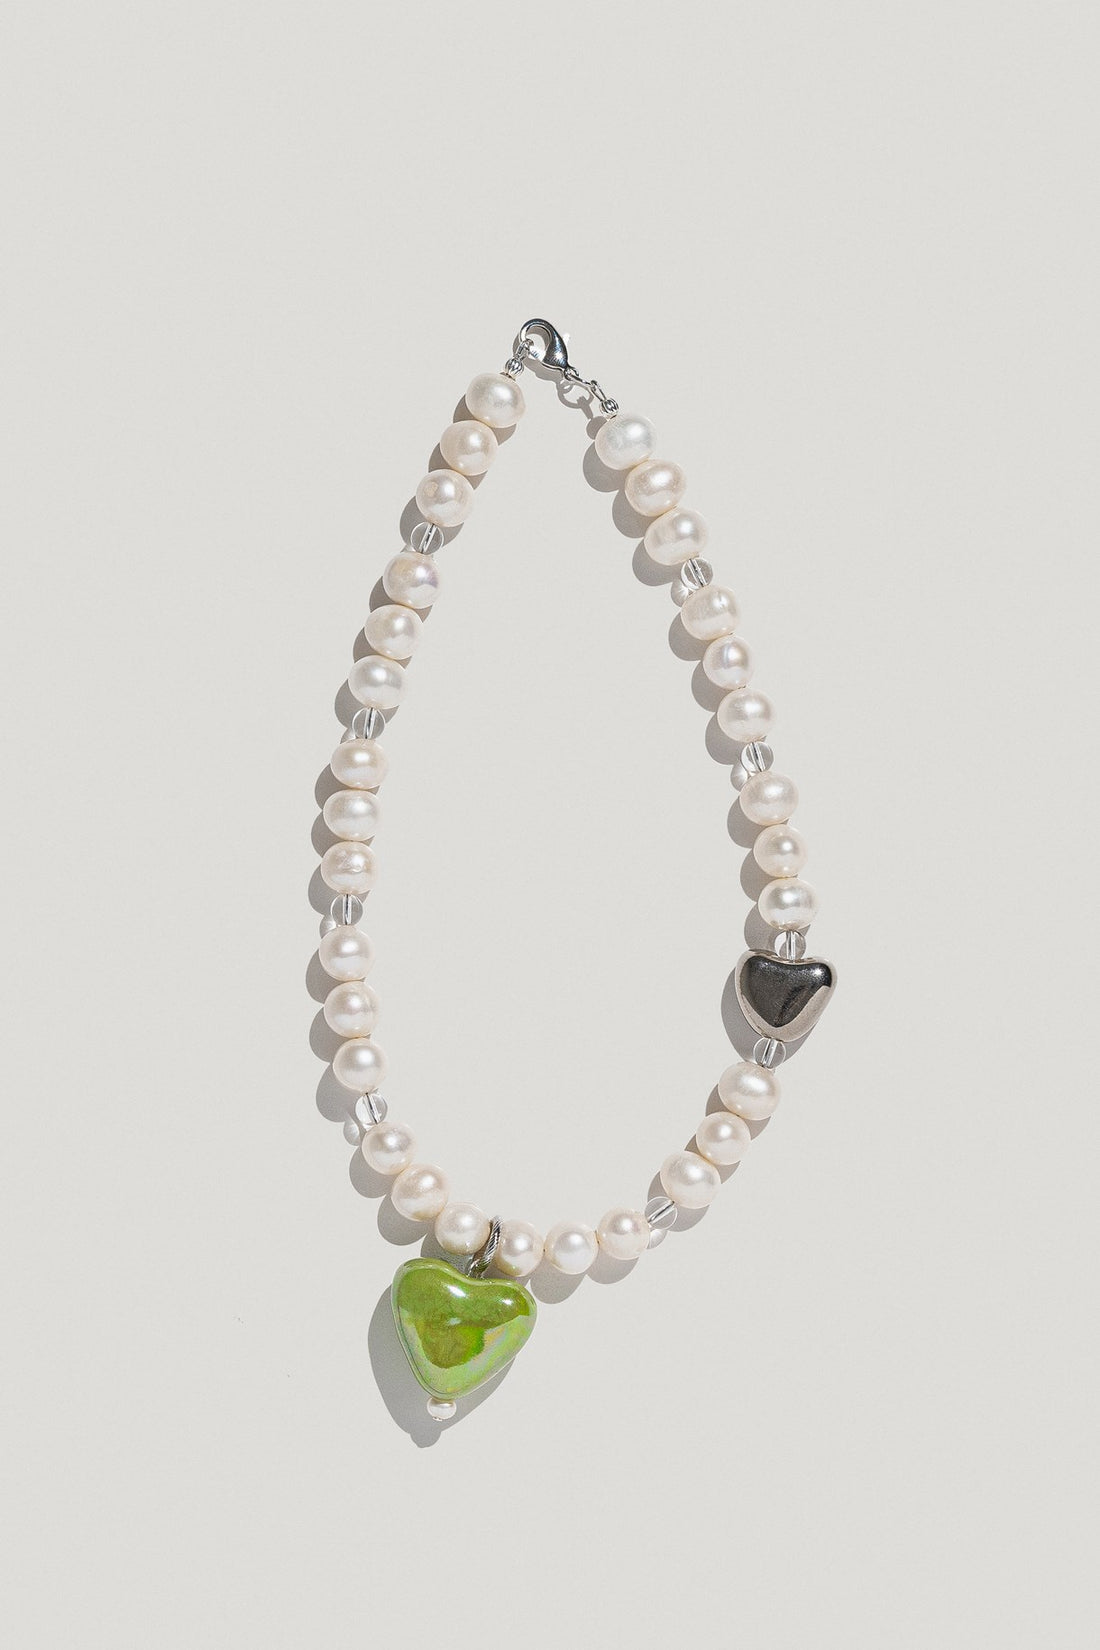 Skarb necklace with pearls and 2 porcelain hearts in green